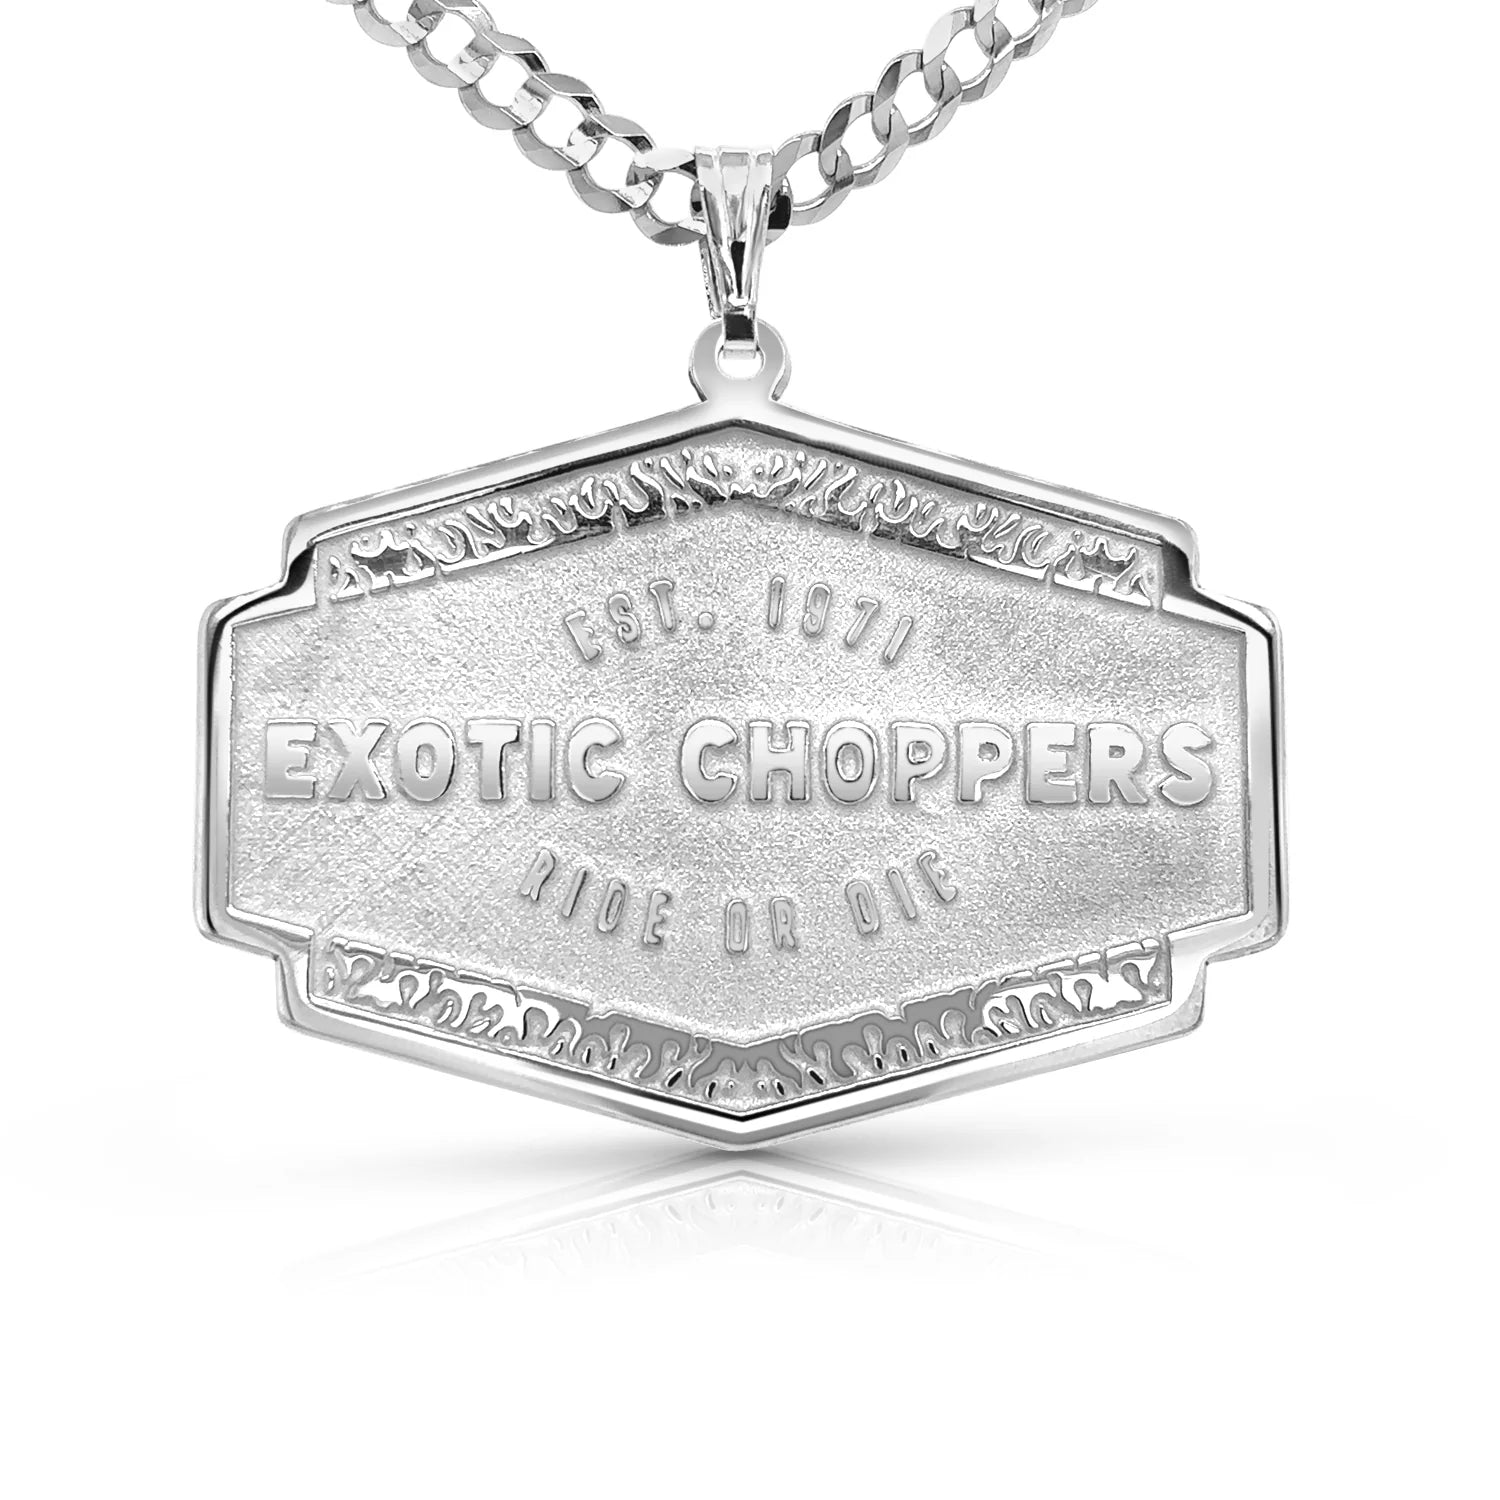 Silver engraved pendant  on a white background, pendant is of a store's logo